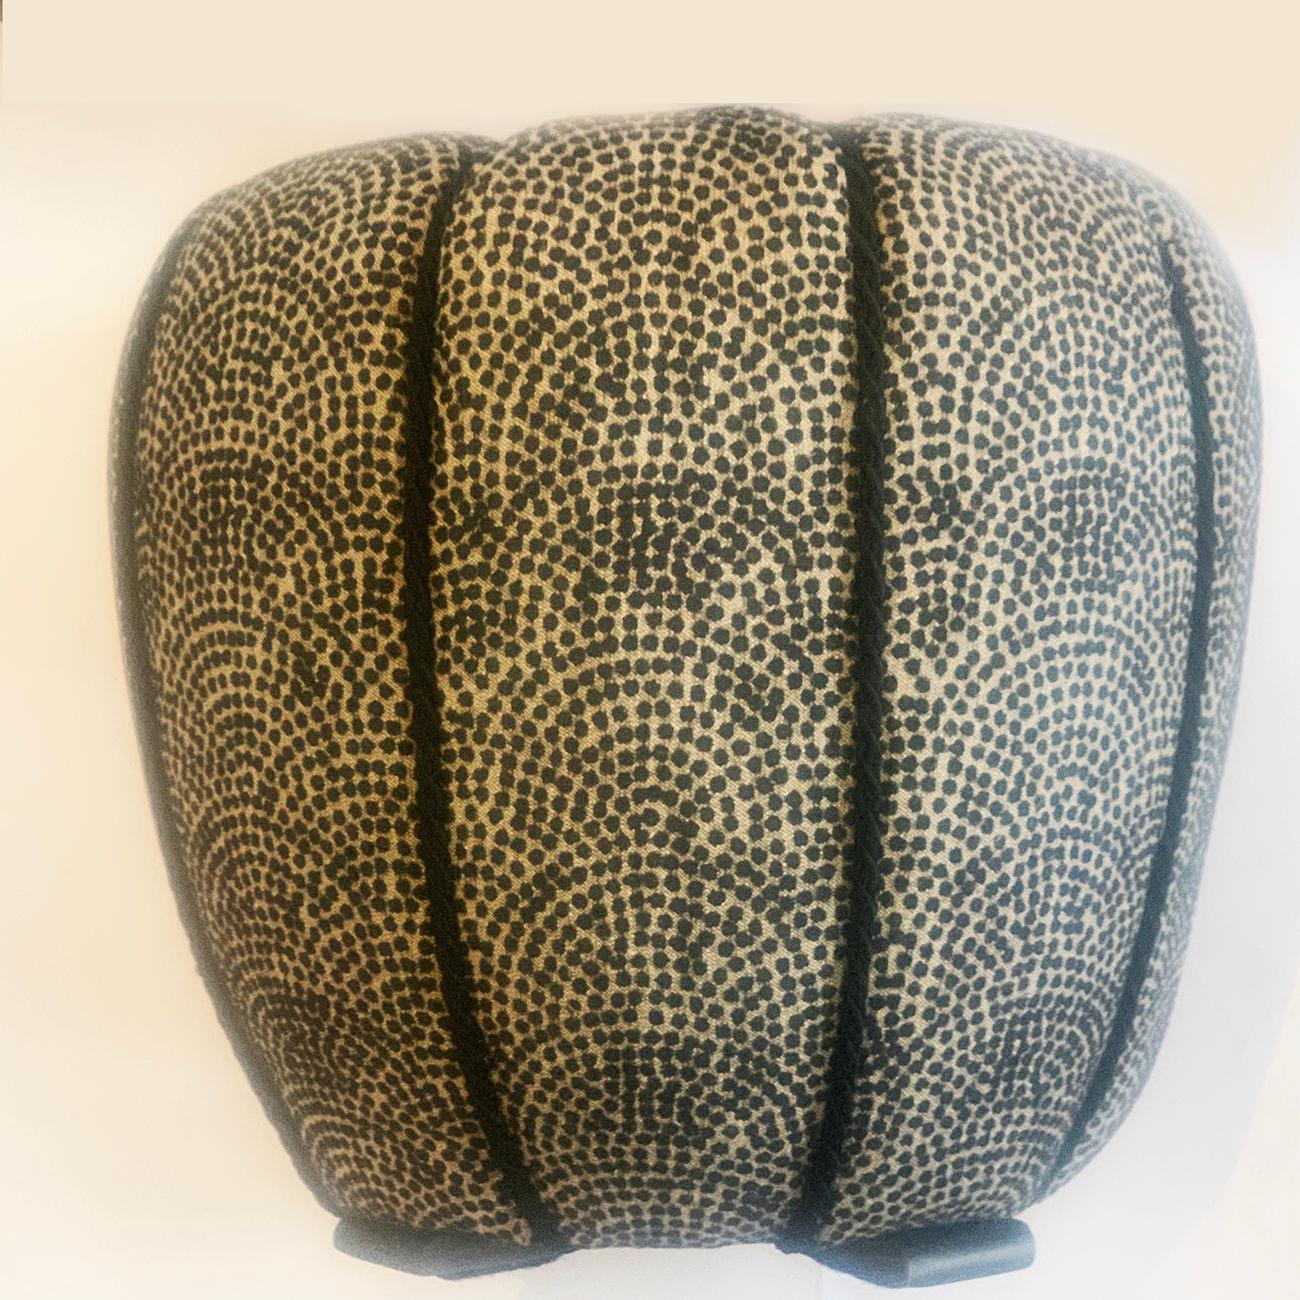 Art Deco pouffe or tabouret by Jindrich Halabala, Czechoslovakia. Completely reupholstered with large button detail and surrounded by black silk cord to central top with same cord between adjoining sections. Totally excellent condition with no